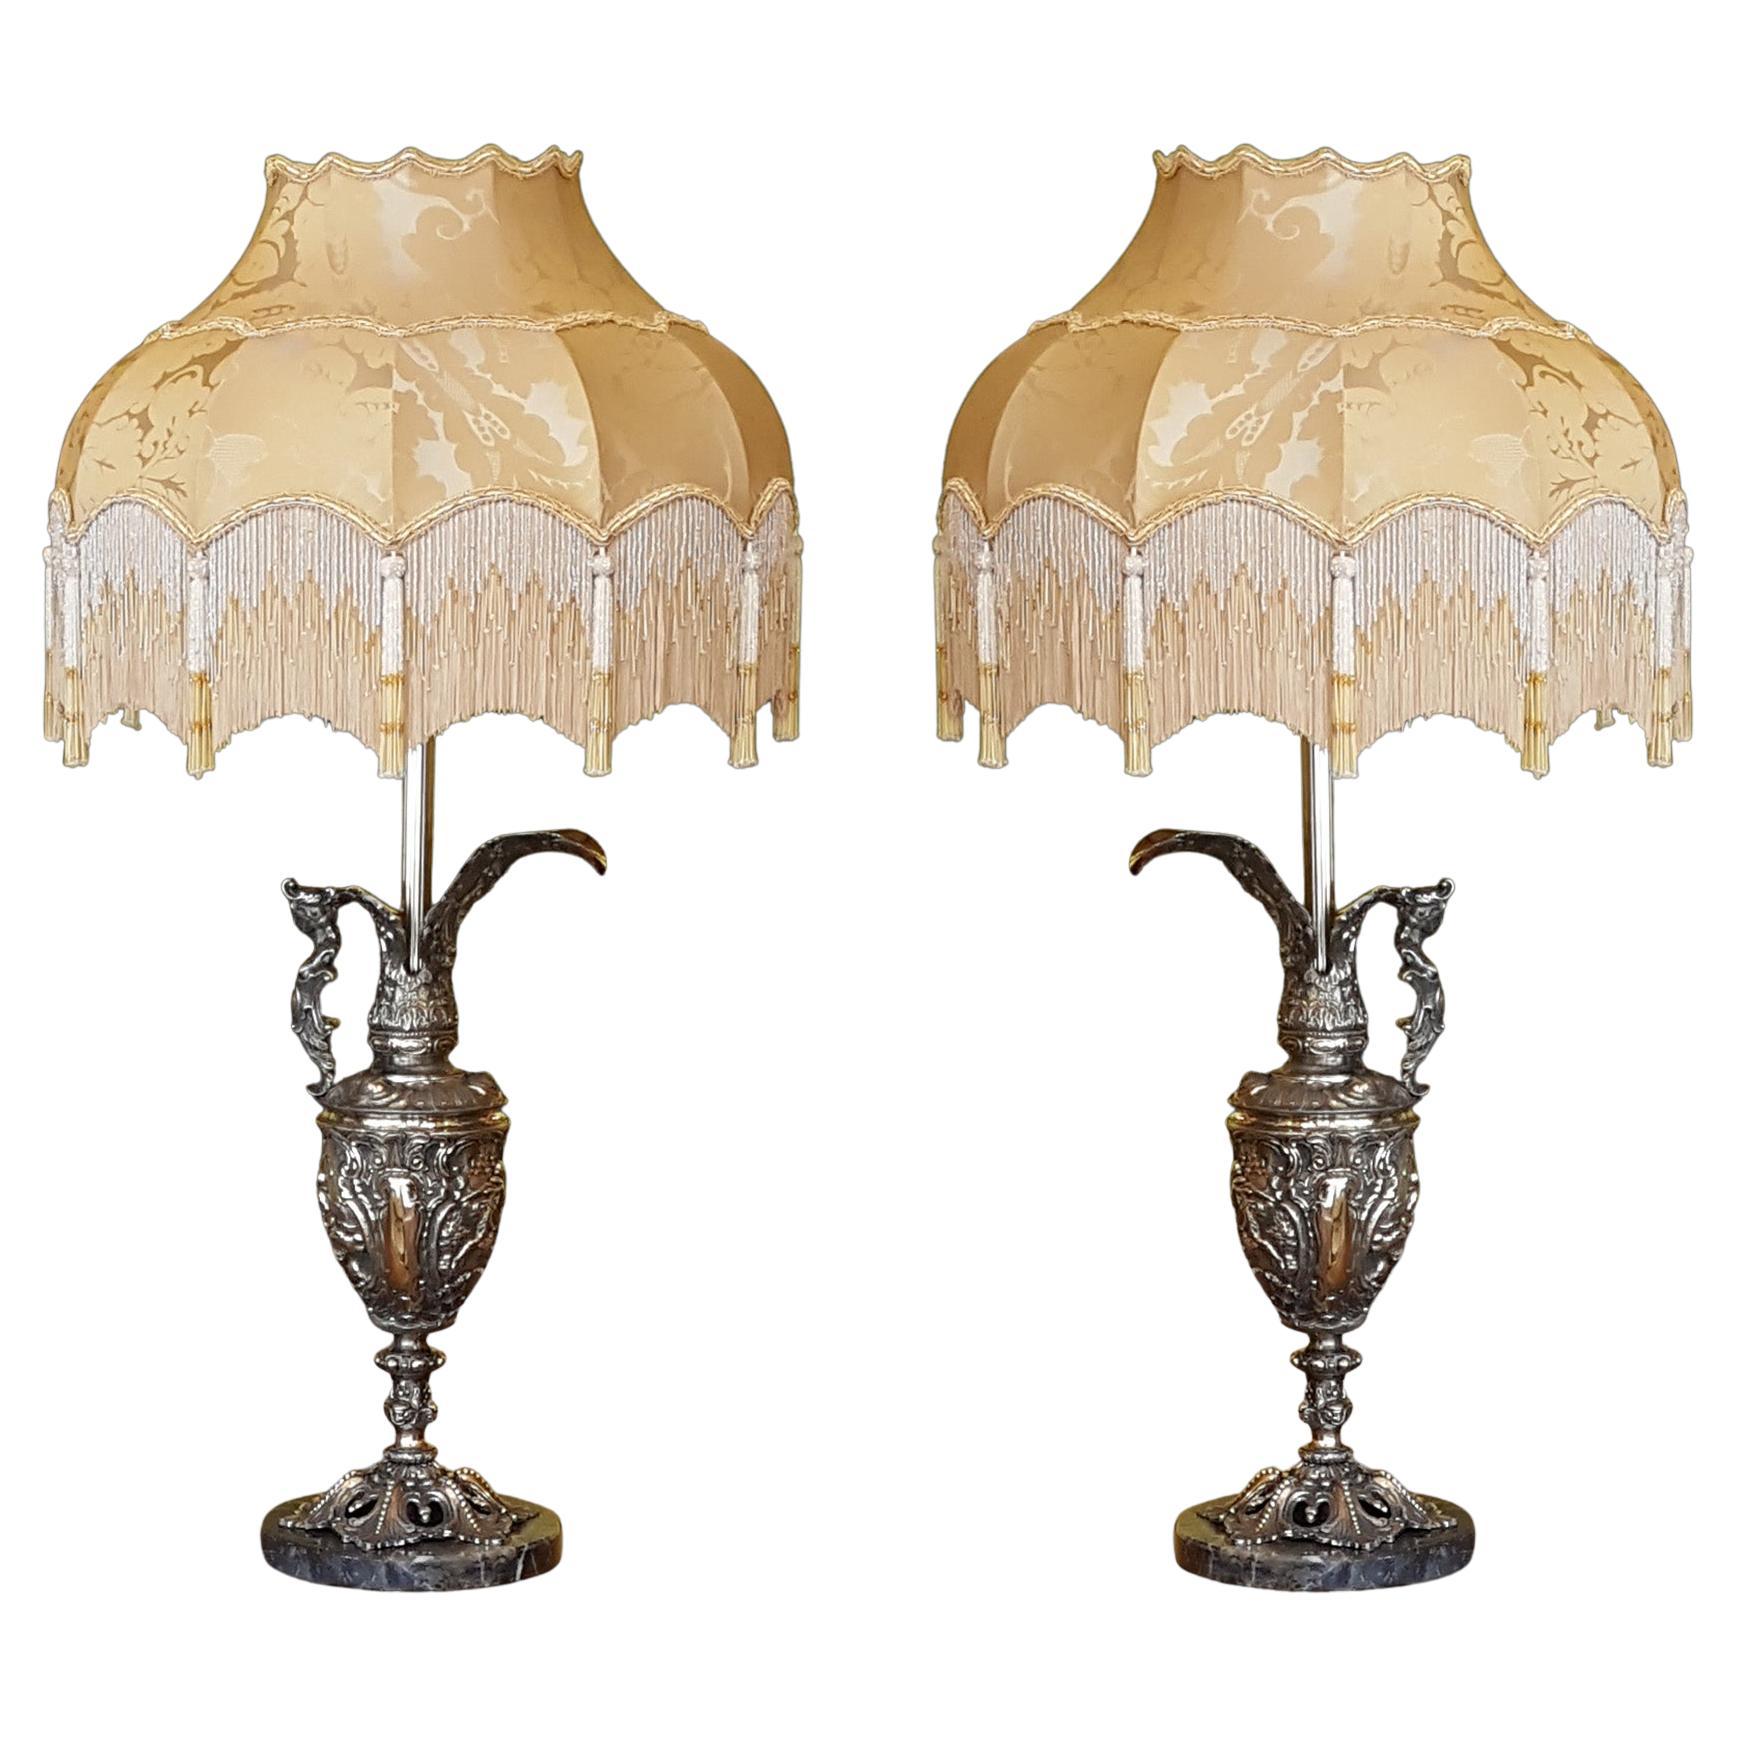 Pair of Late 19th Century Gilt Ewer Lamps For Sale